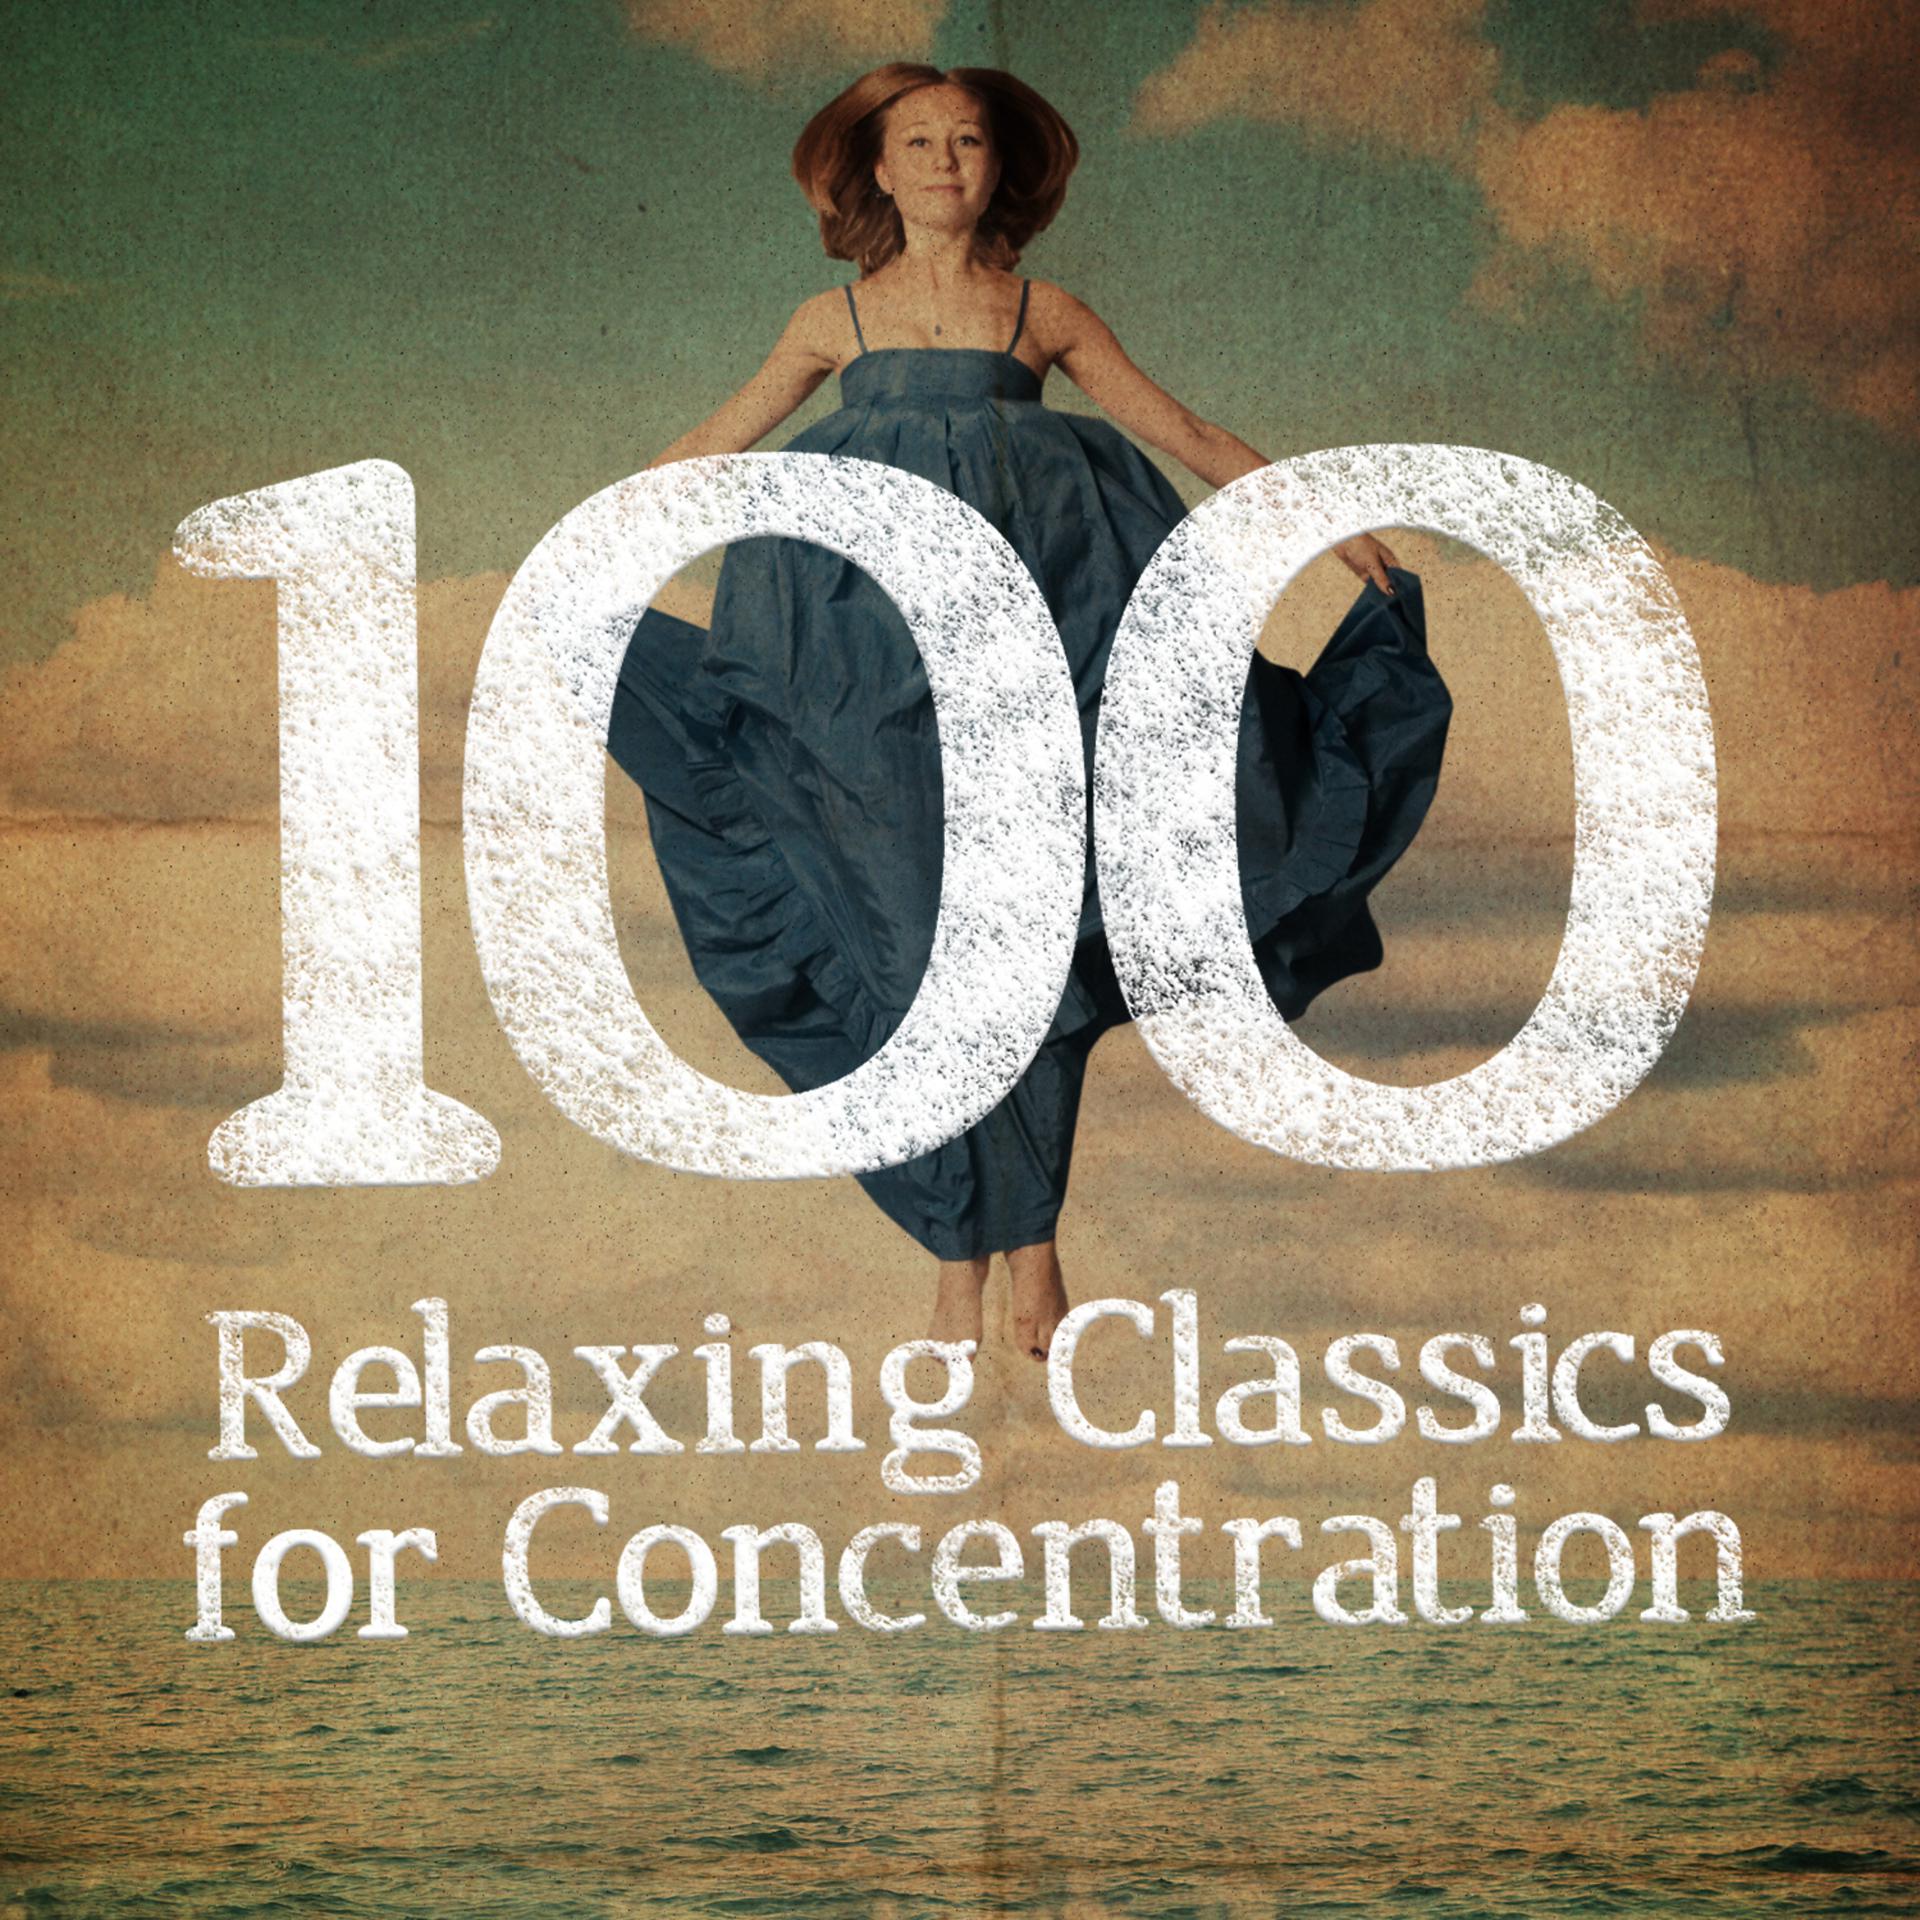 Постер альбома 100 Relaxing Classics for Concentration